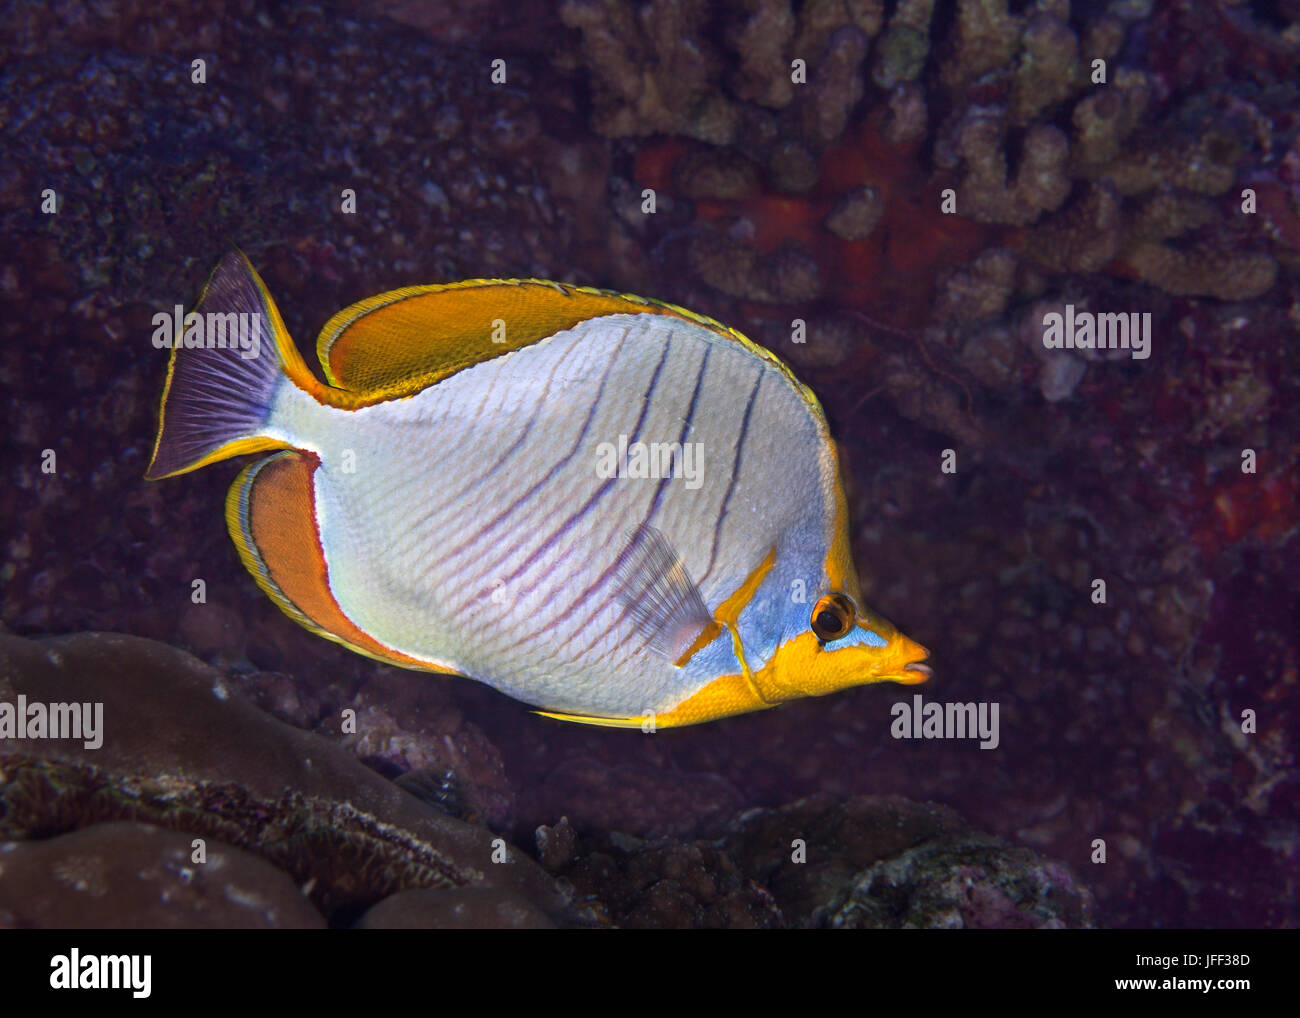 Close up image of Yellow head Butterflyfish (Chaetodon xanthocephalus). Maldives, Indian Ocean. Stock Photo